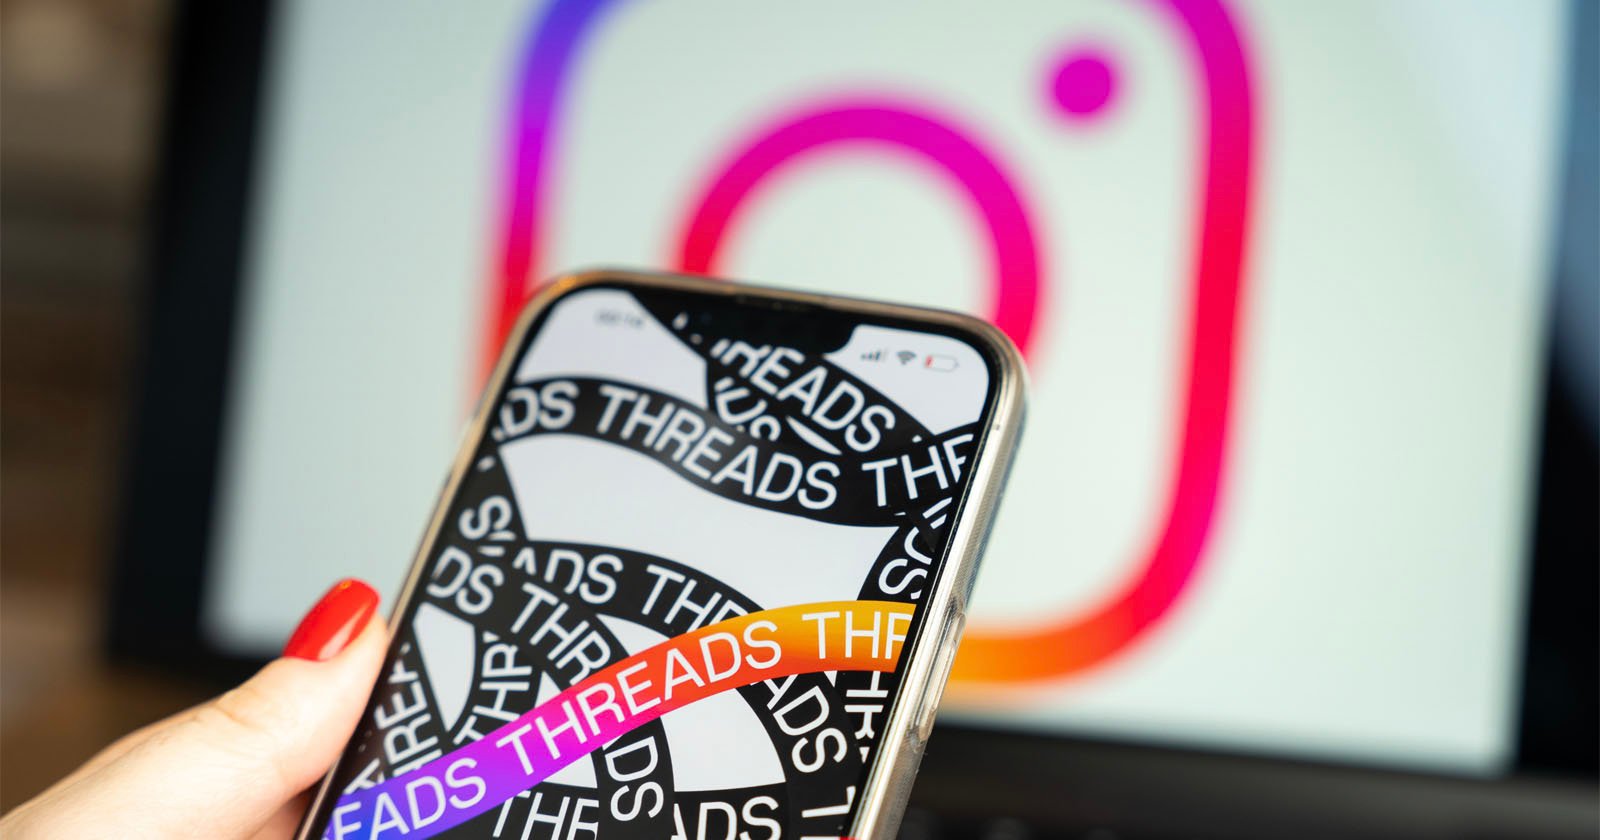  instagram threads won automatically suggest political content 